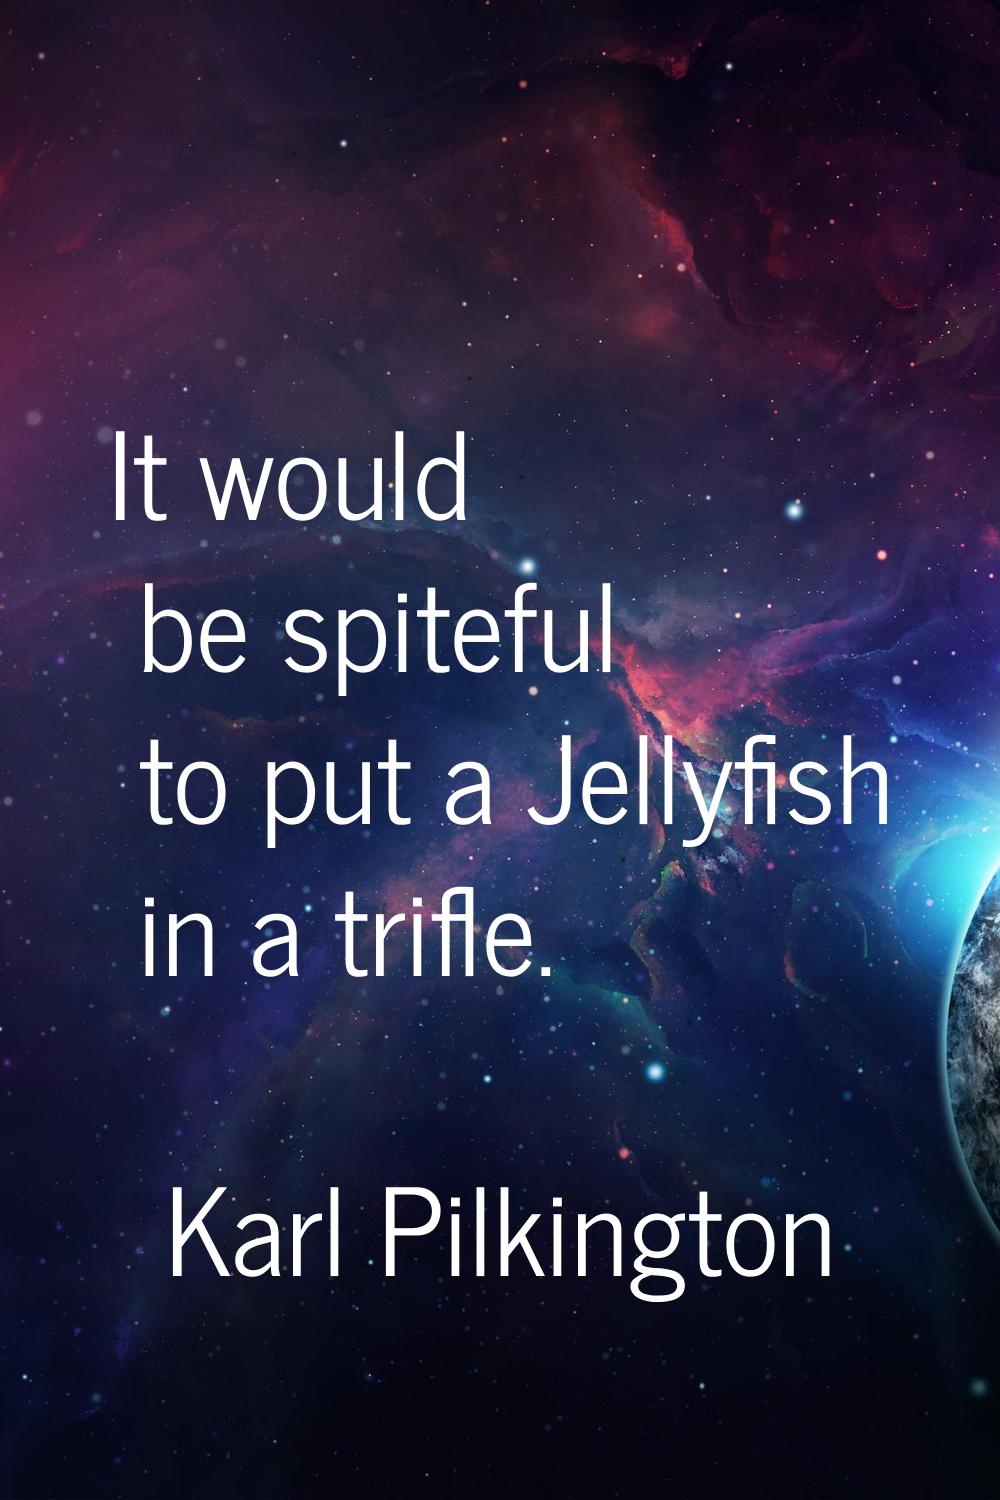 It would be spiteful to put a Jellyfish in a trifle.